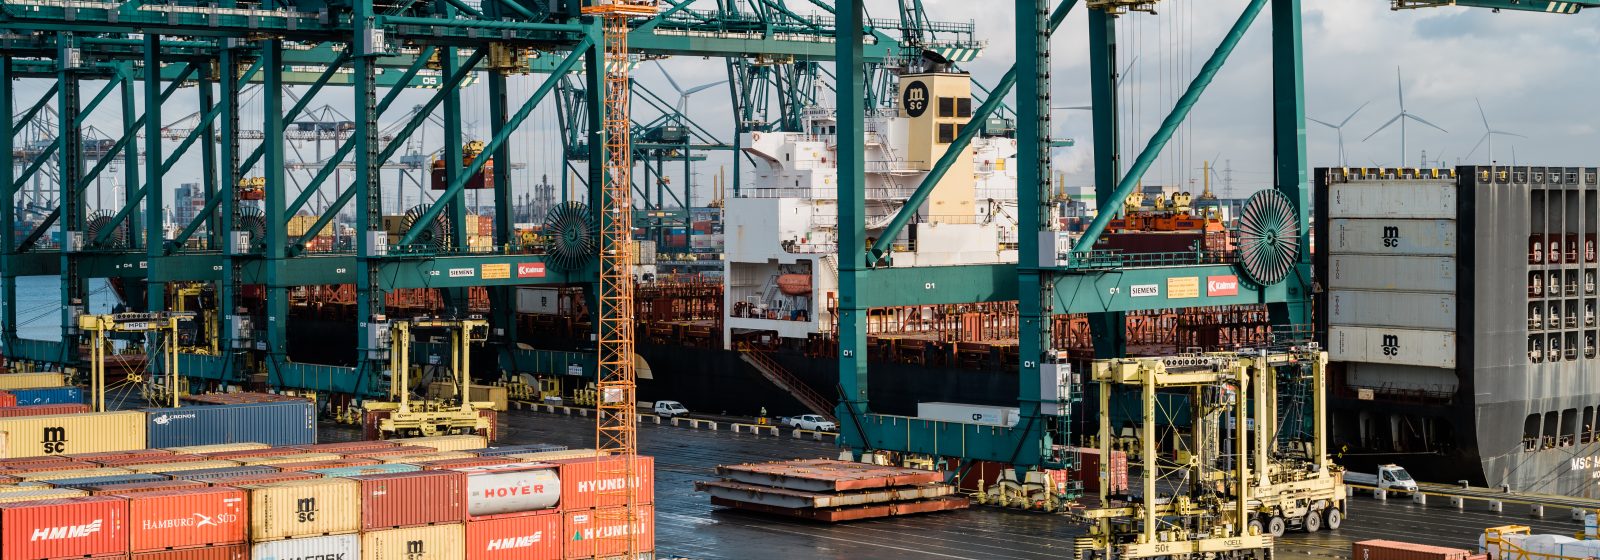 MPET in Antwerpse haven